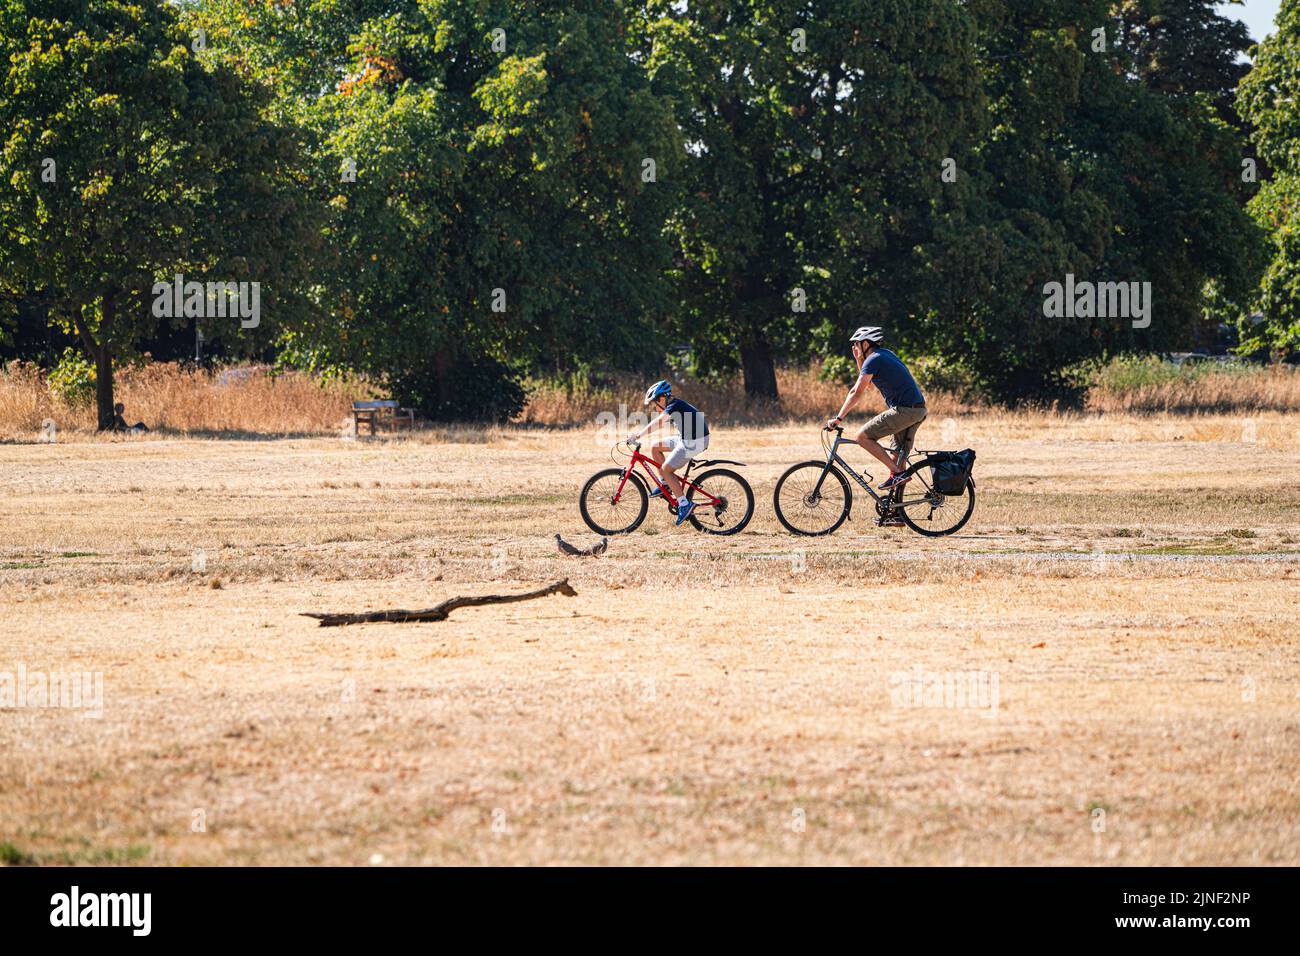 Wimbledon London, UK. 11 August 2022 . Cyclists  riding on a heat soaked and drought stricken  Wimbledon Common  as temperatures are forecast to soar  to 35celsius today and that London could soon be placed under a hosepipe ban after counties of Kent and Sussex formerly declared a ban from 12th Augustf Credit. amer ghazzal/Alamy Live News Stock Photo